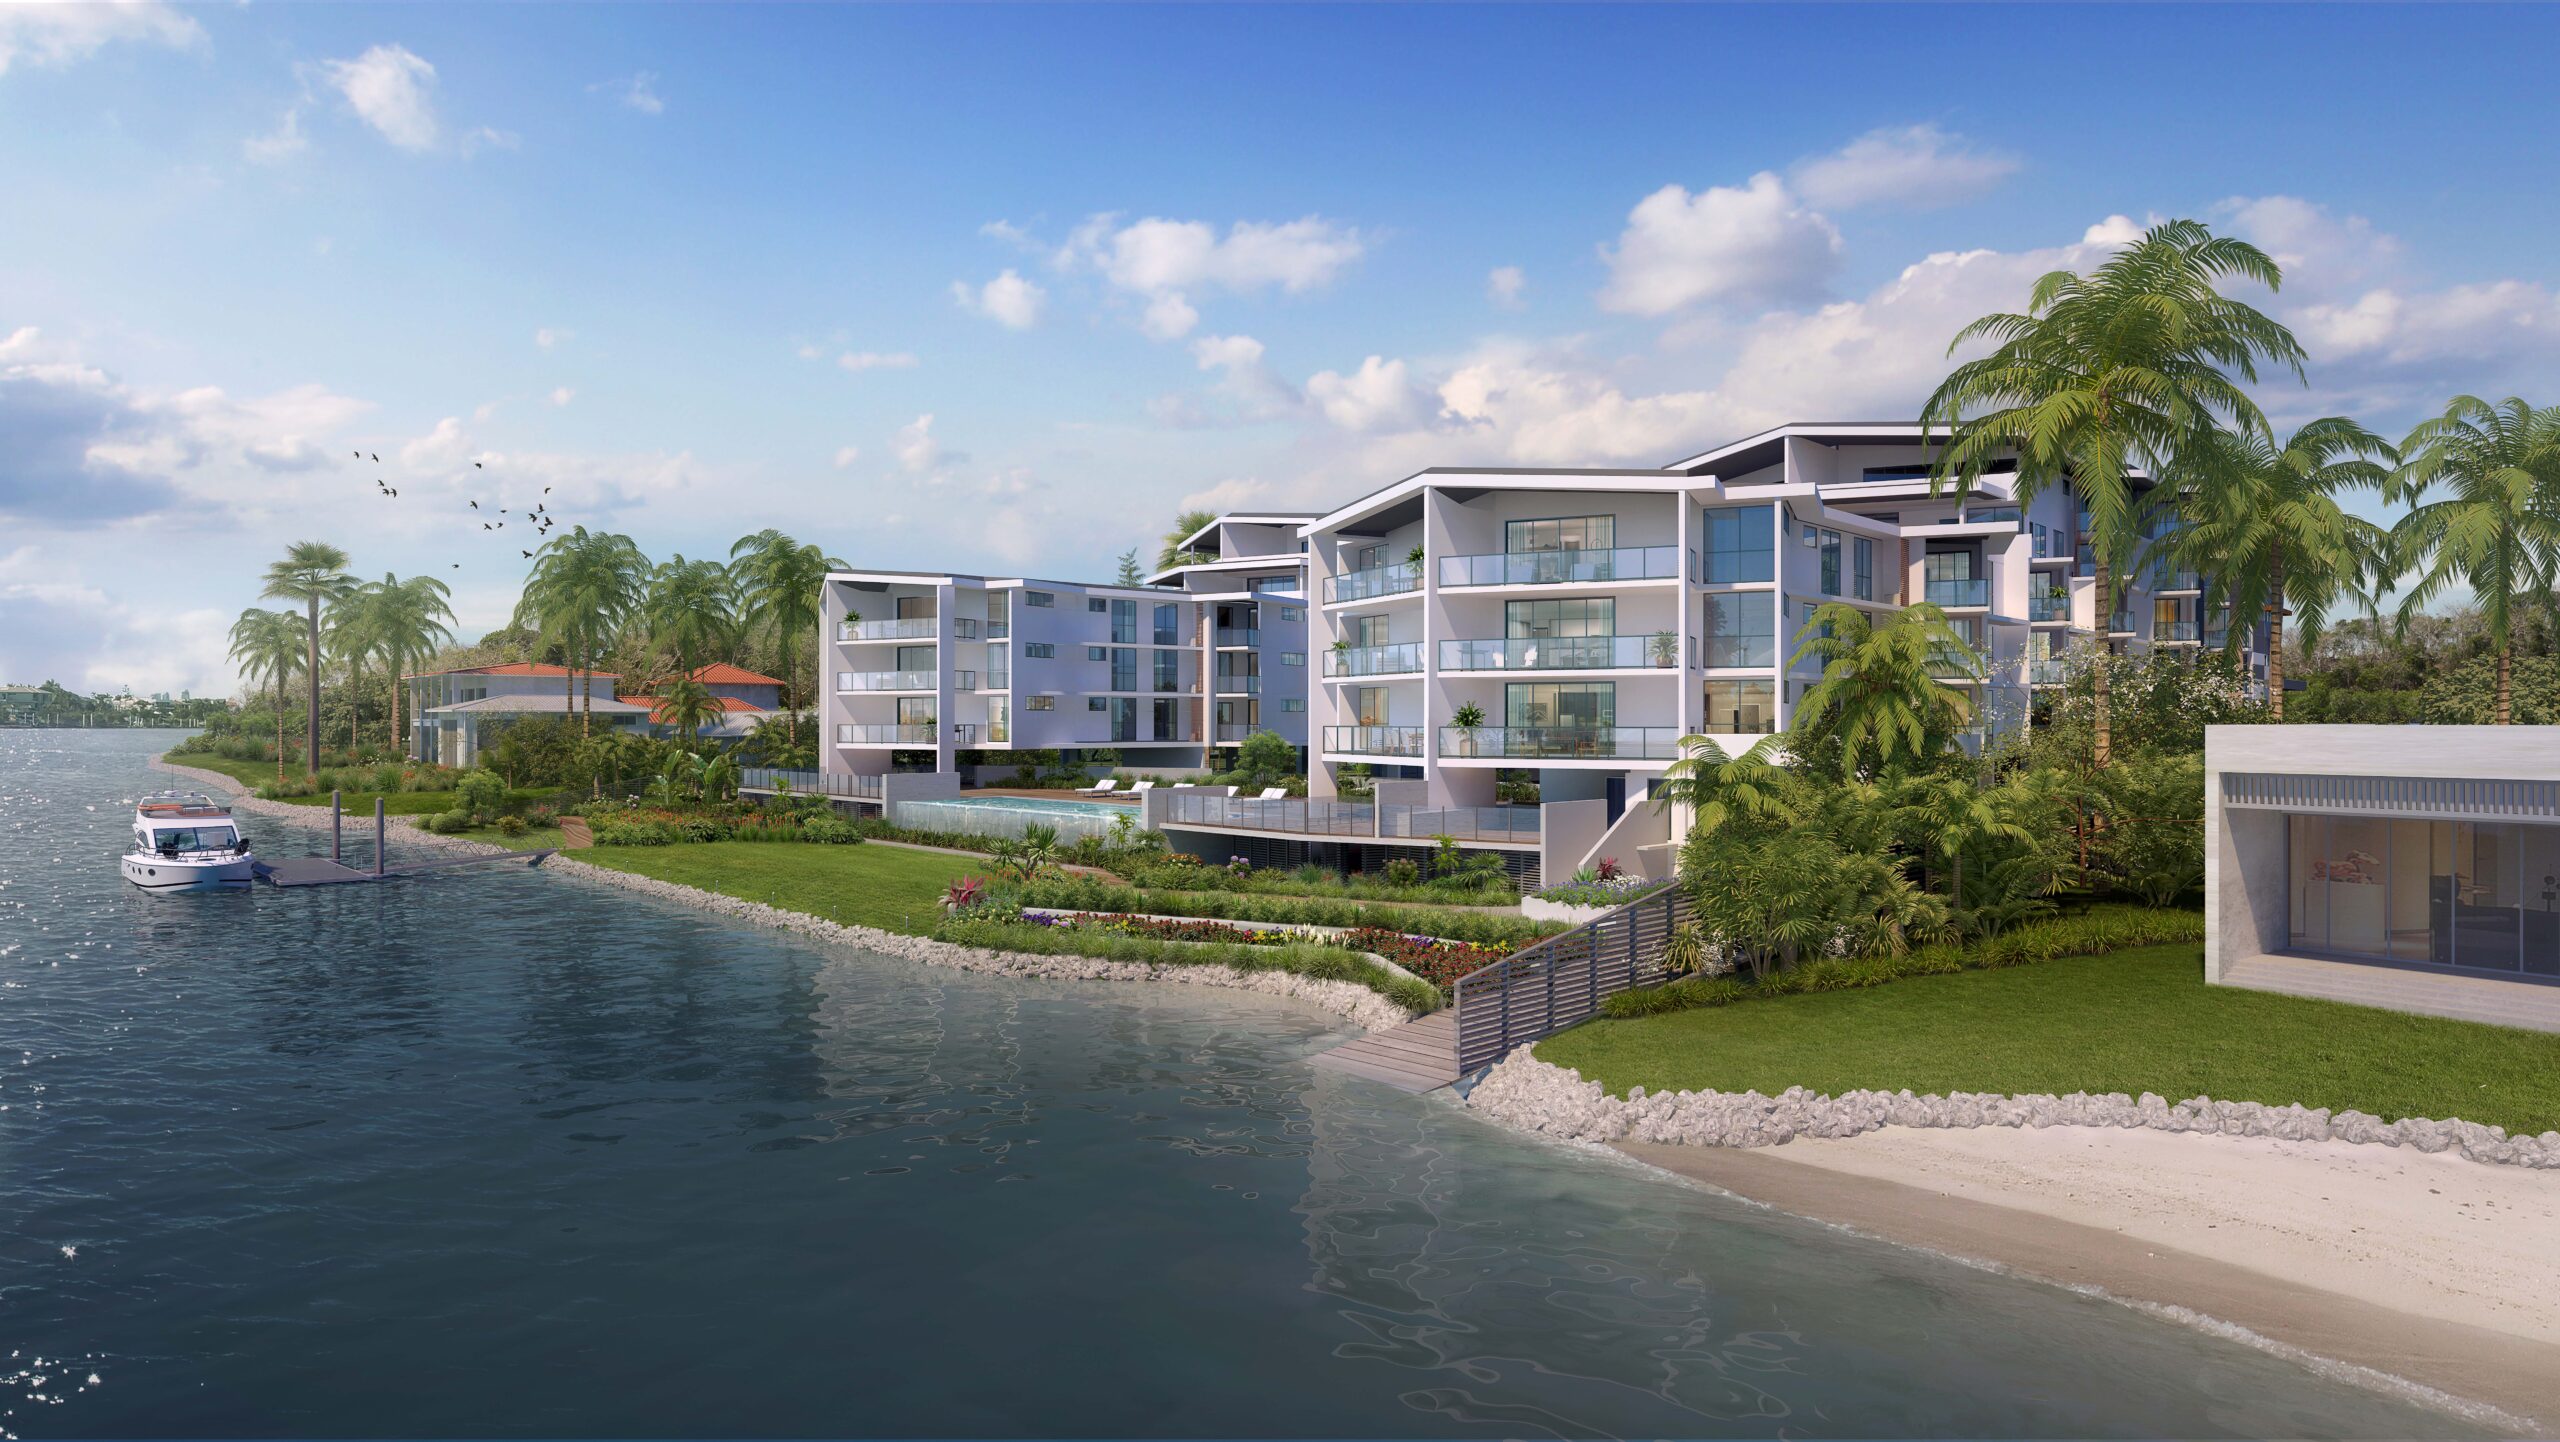 View across the river towards the apartment development showcasing the proximity to the water